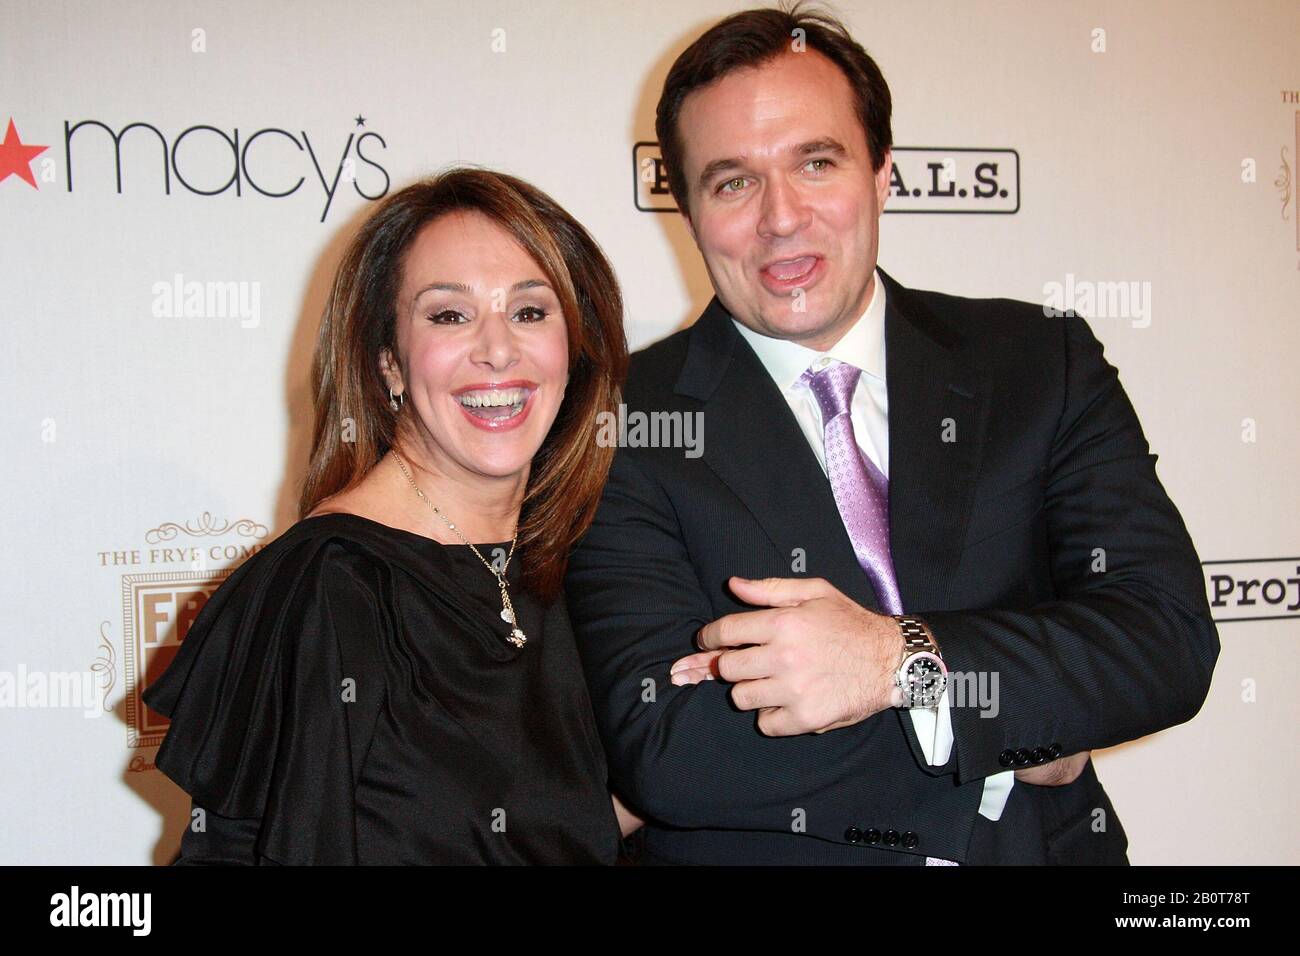 New York, NY, USA. 7 October, 2008. TV hosts, Rosanna Scotto, Greg Kelly at the Project A.L.S. benefit gala 'Tomorrow is Tonight' at the Waldorf=Astoria. Credit: Steve Mack/Alamy Stock Photo